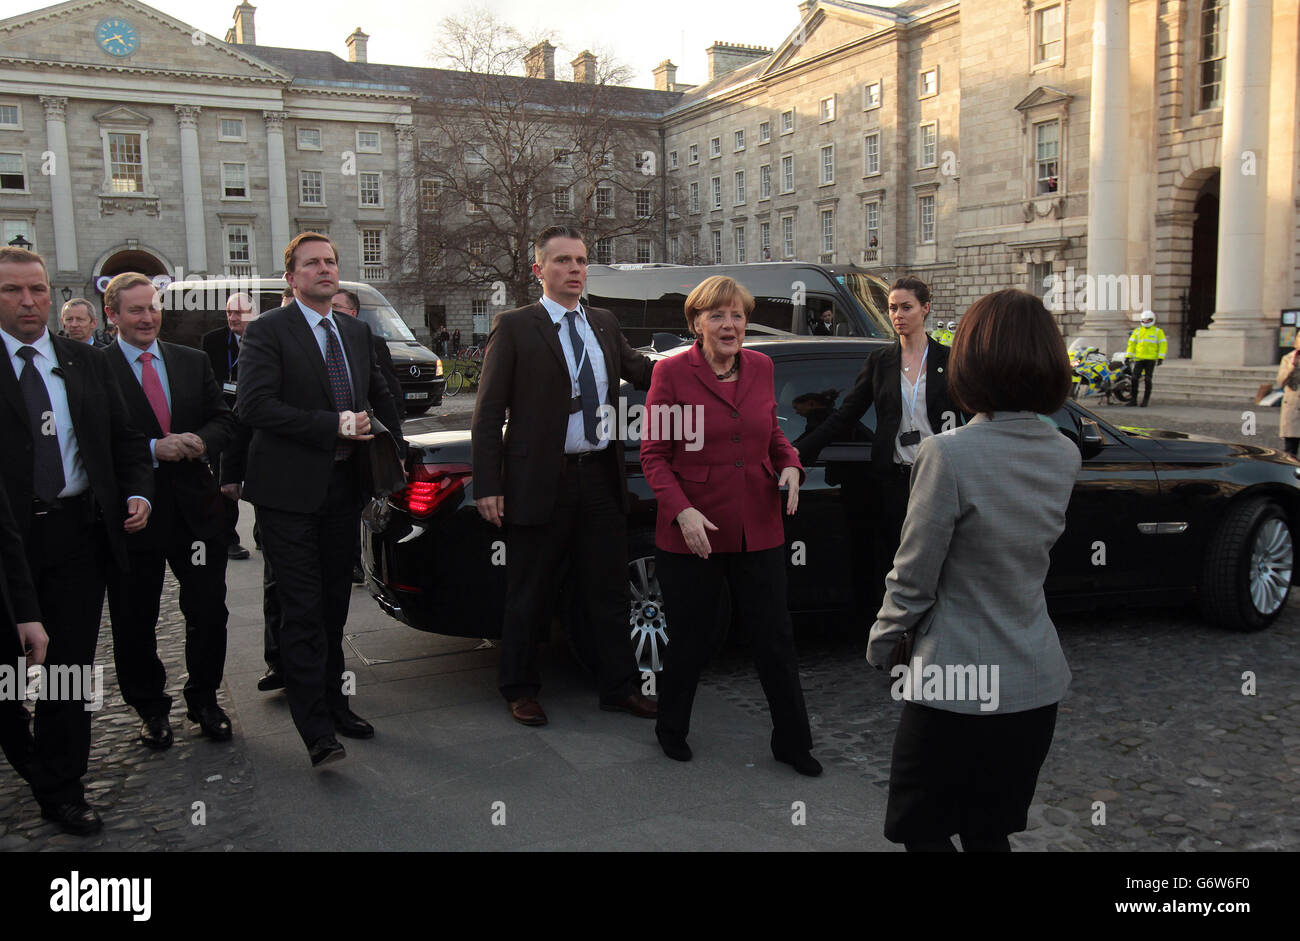 German Chancellor Angela Merkel arrives at Trinity College in Dublin where she gave a talk on Globalisation to the college Philosophical society today. Stock Photo